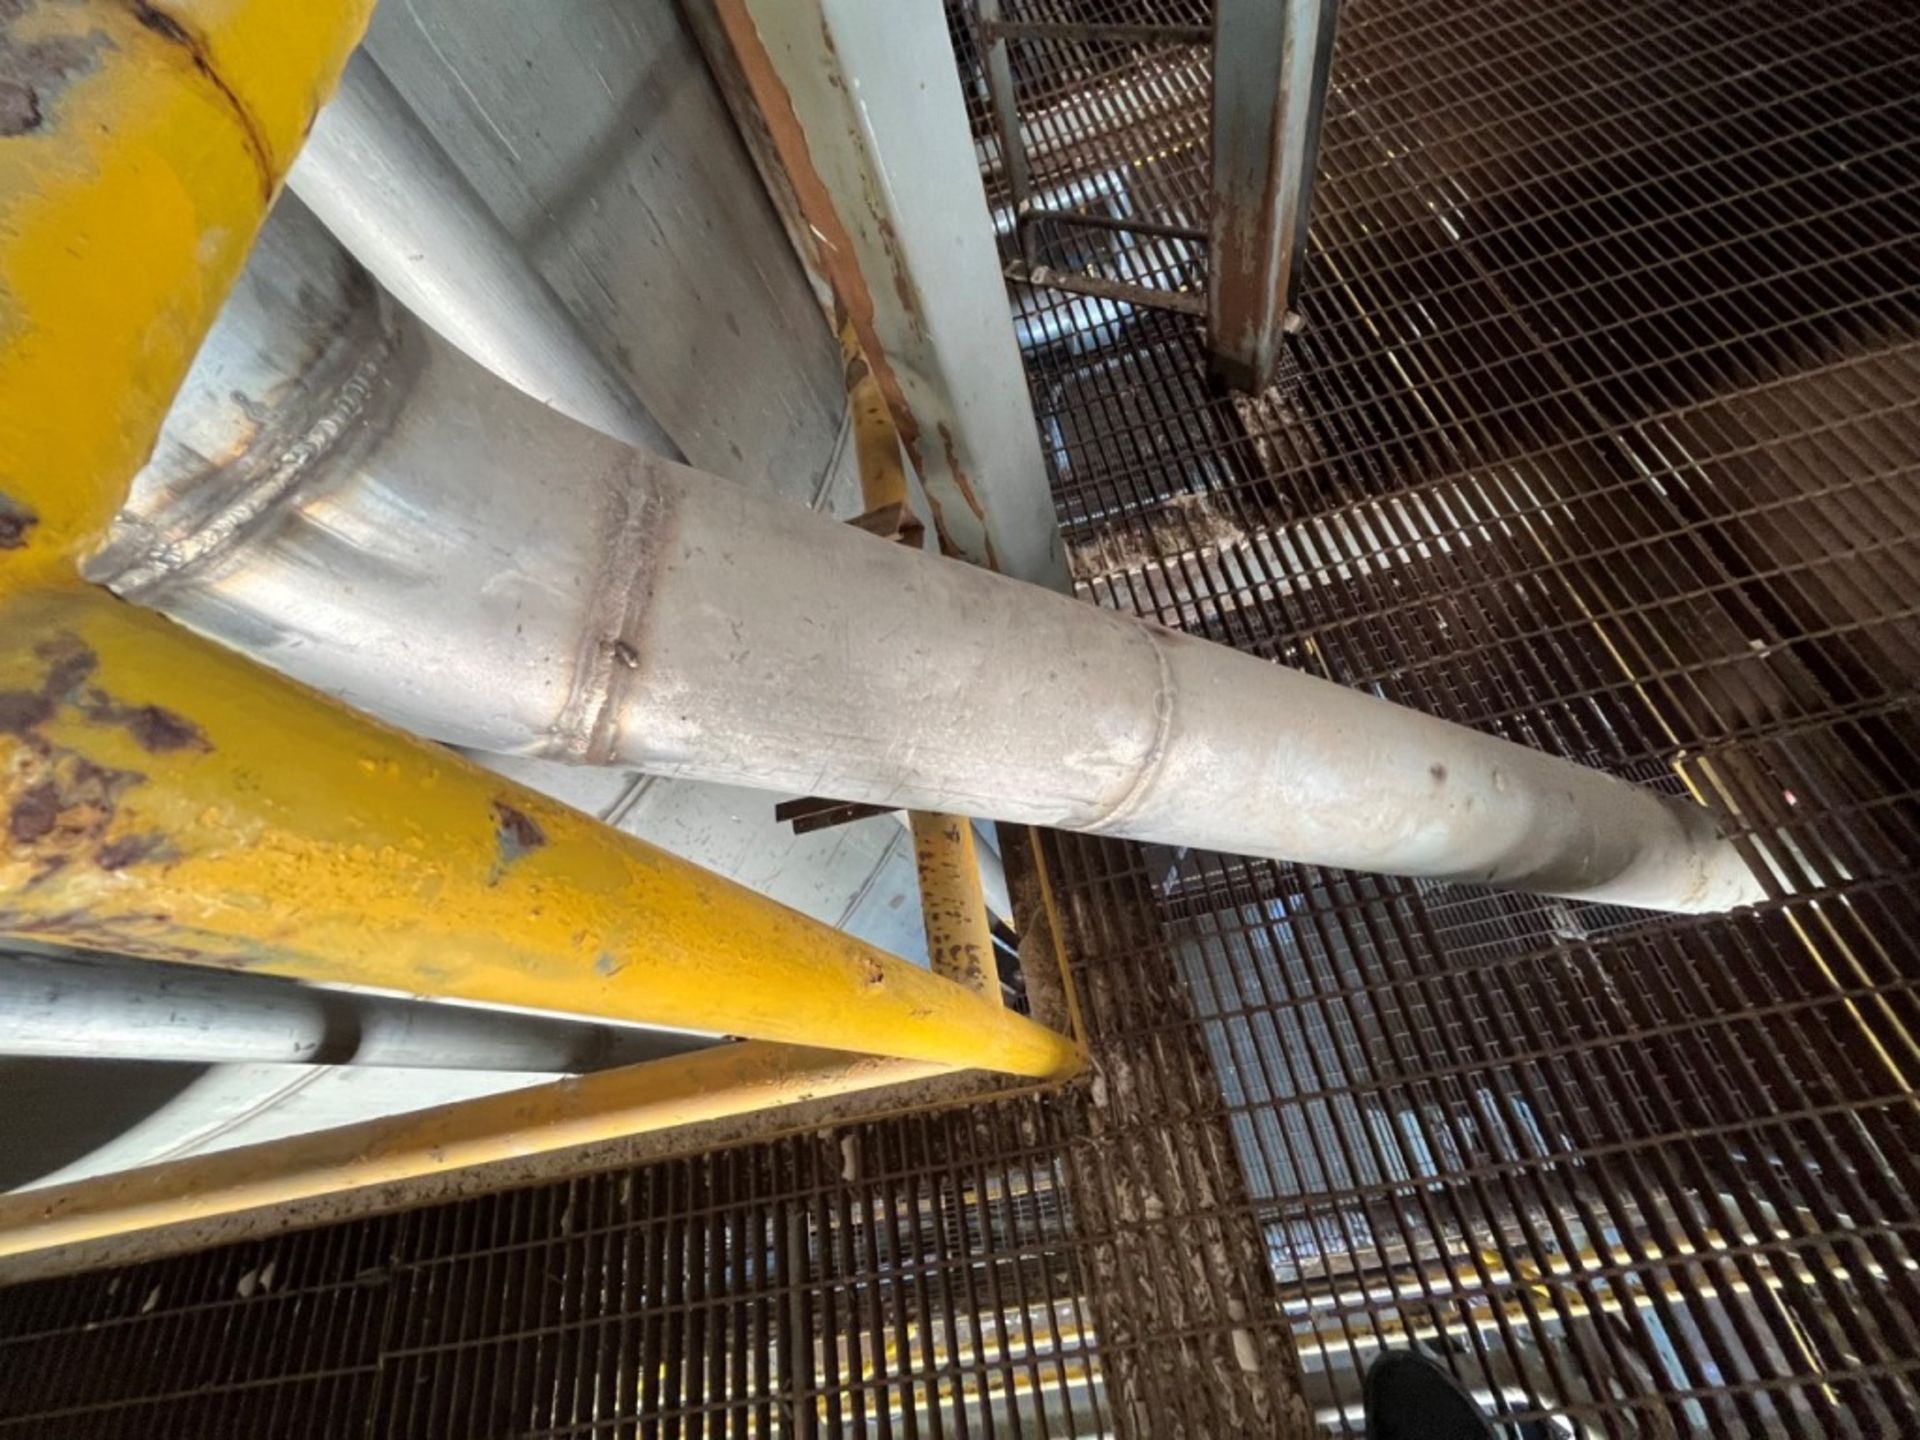 Lot of stainless steel pipe includes: Approximately 100 linear meters of 3 1/2" pipe - Bild 39 aus 47